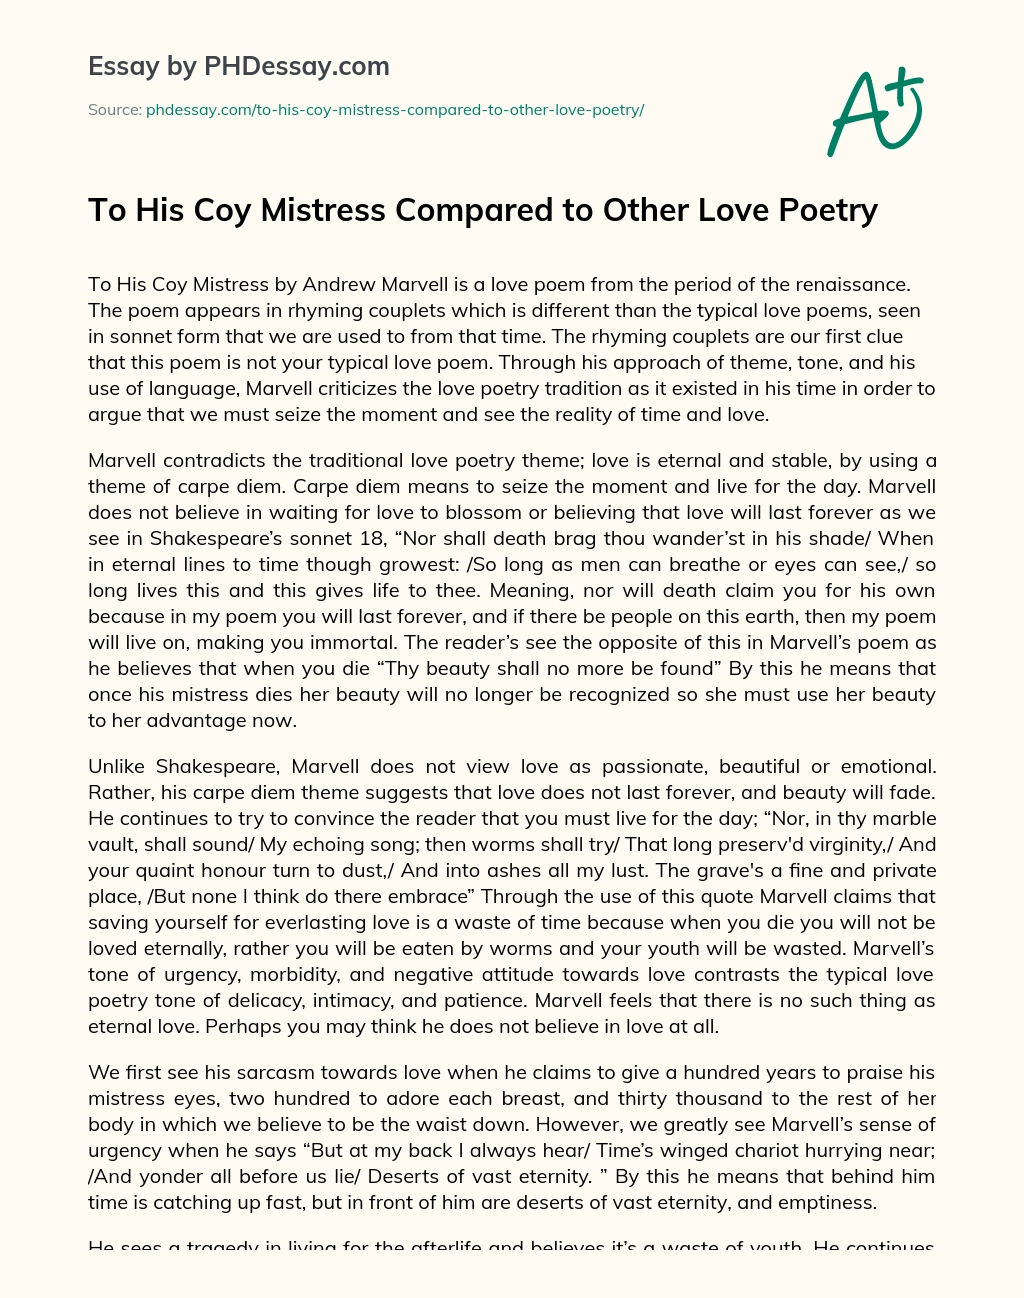 To His Coy Mistress Compared to Other Love Poetry essay